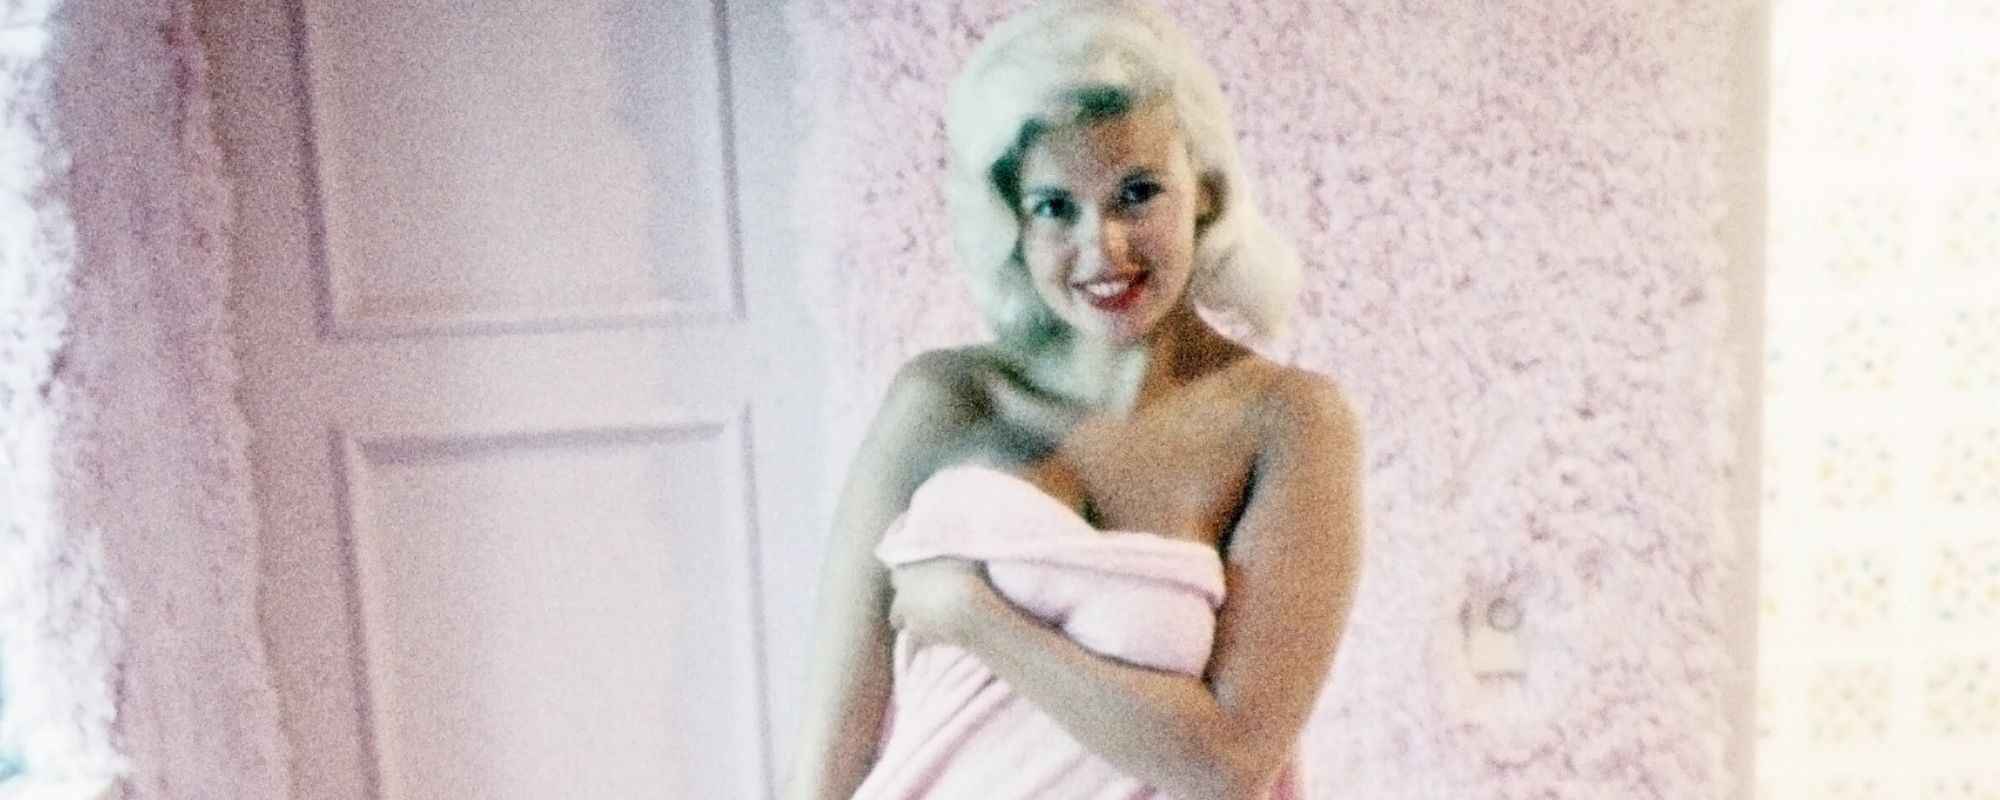 ainah tan recommends jayne mansfield playboy photos pic